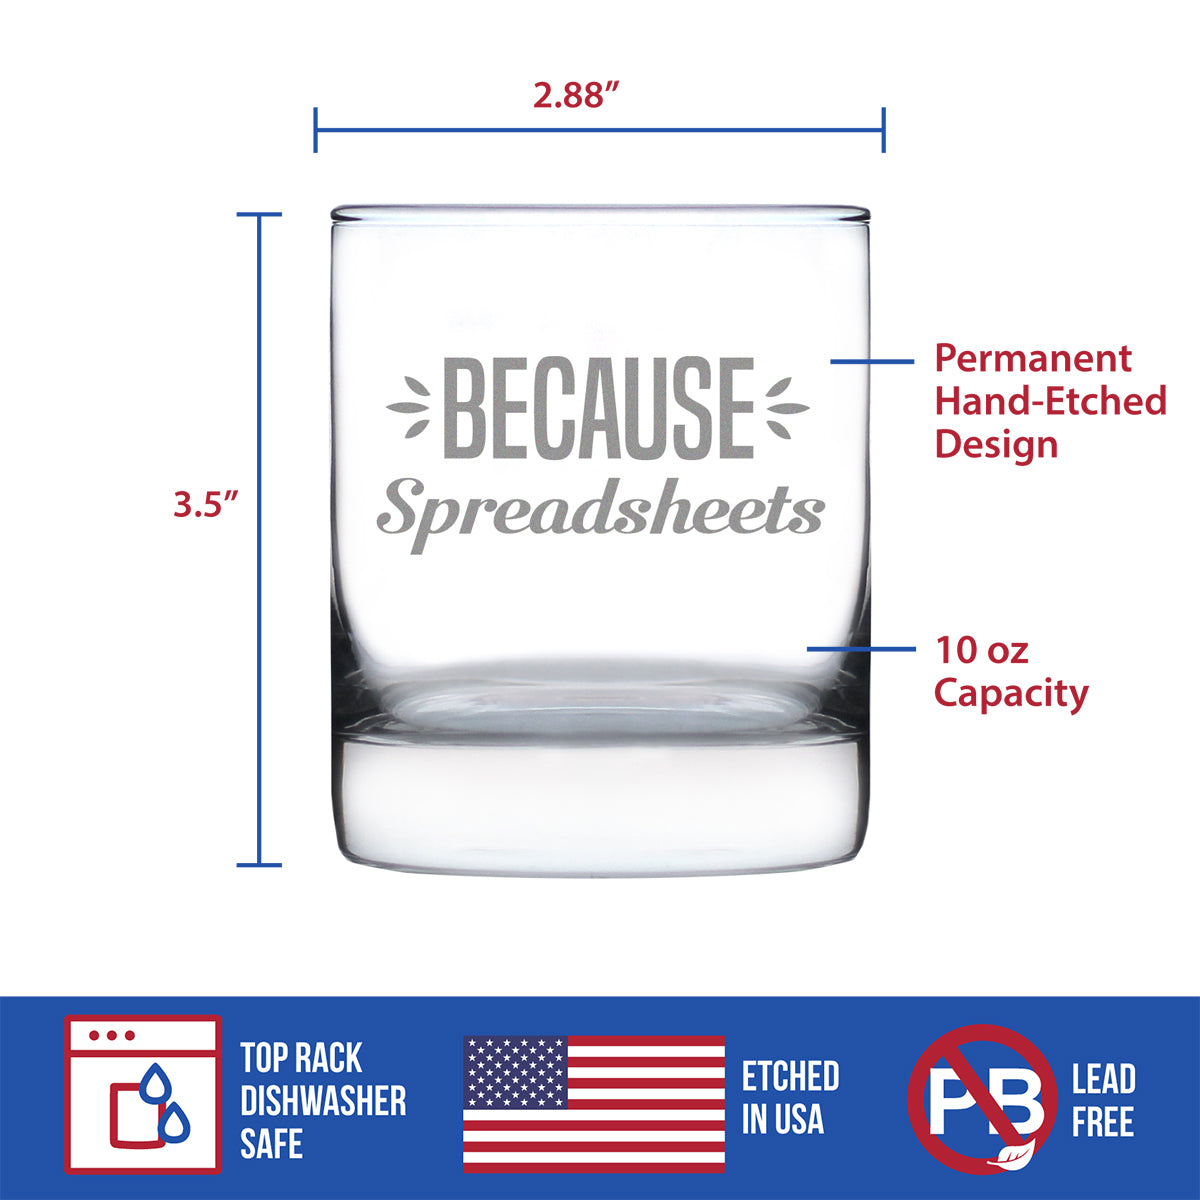 Because Spreadsheets 10 oz Rocks Glass or Old Fashioned Glass, Etched Sayings, Funny Gift for Coworkers, Boss, or Favorite Accountant